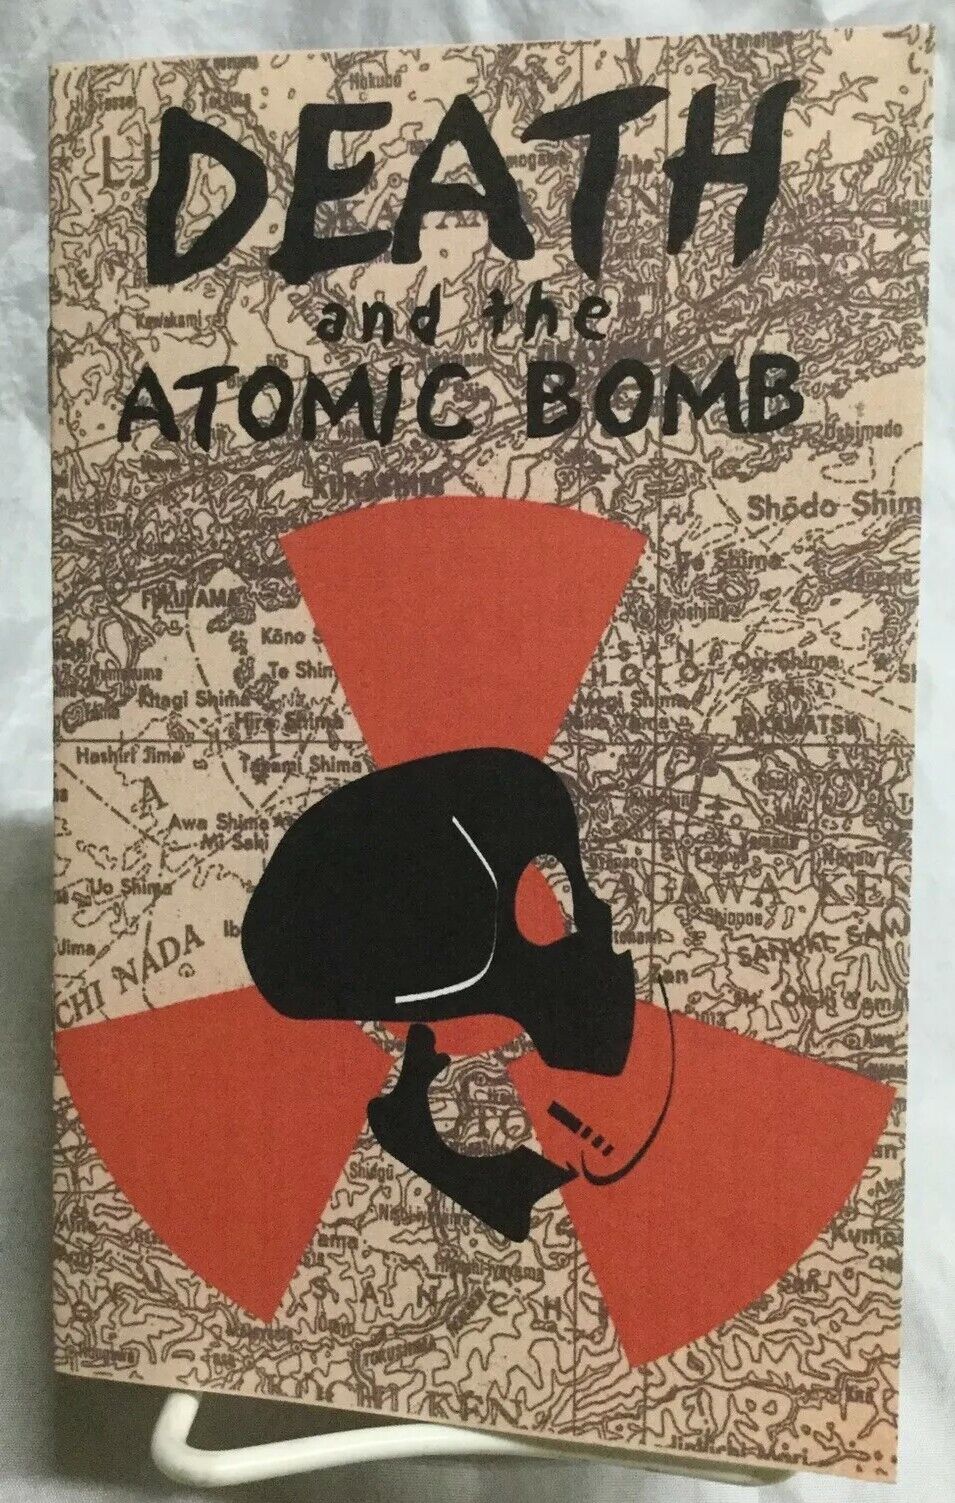 Death and the Atomic Bomb by Jerry Stanford Failure Comics